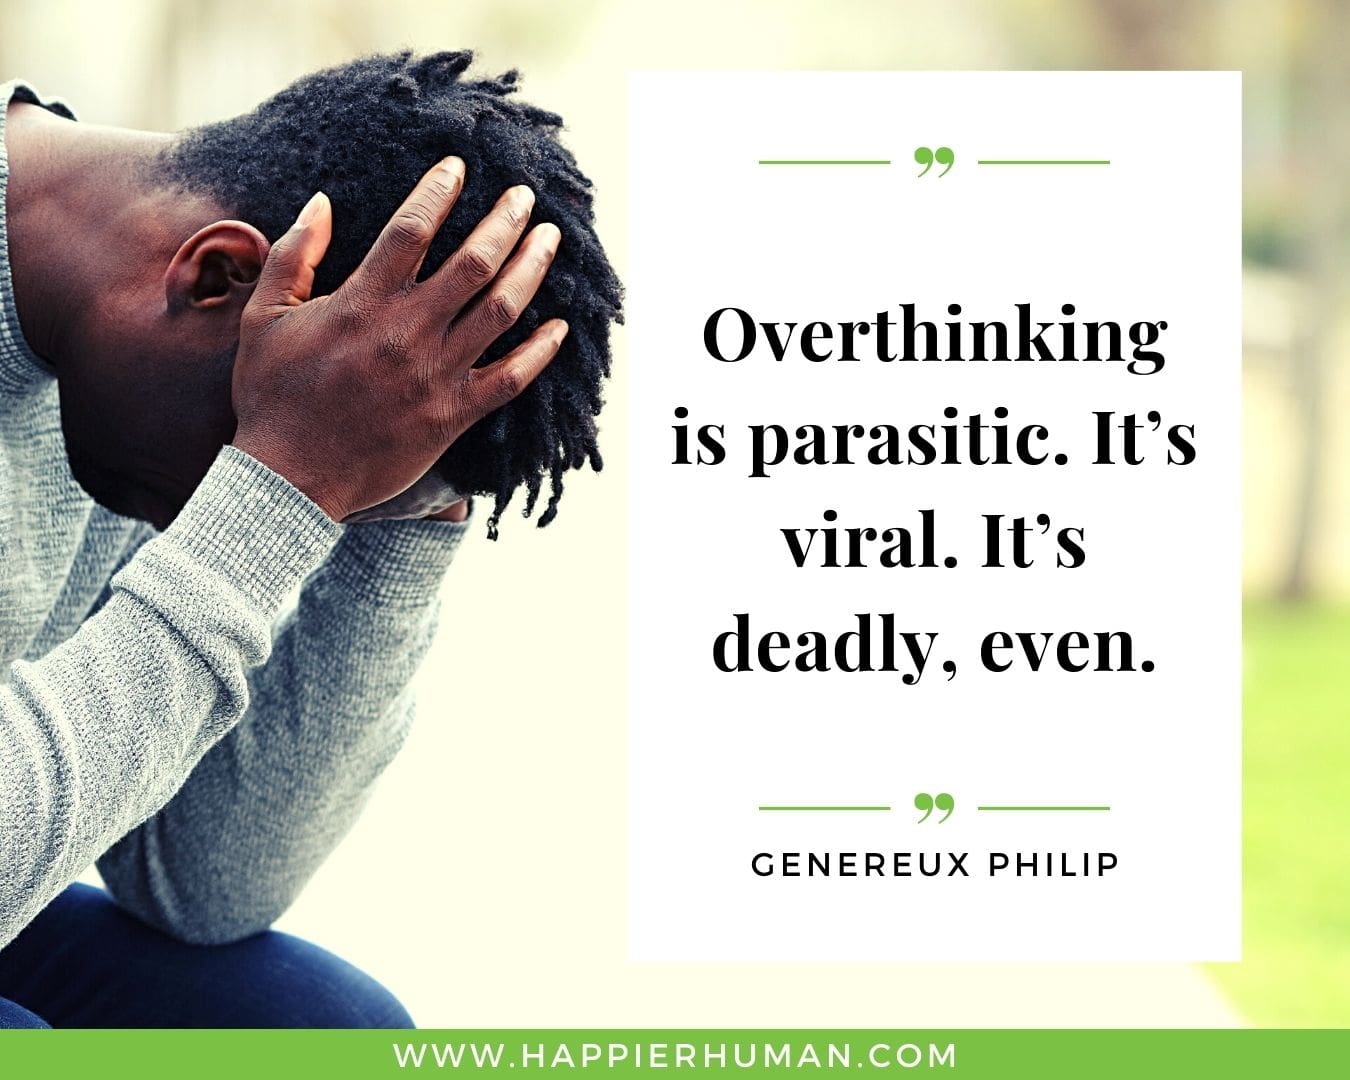 Overthinking Quotes - "Overthinking is parasitic. It’s viral. It’s deadly, even." - Genereux Philip